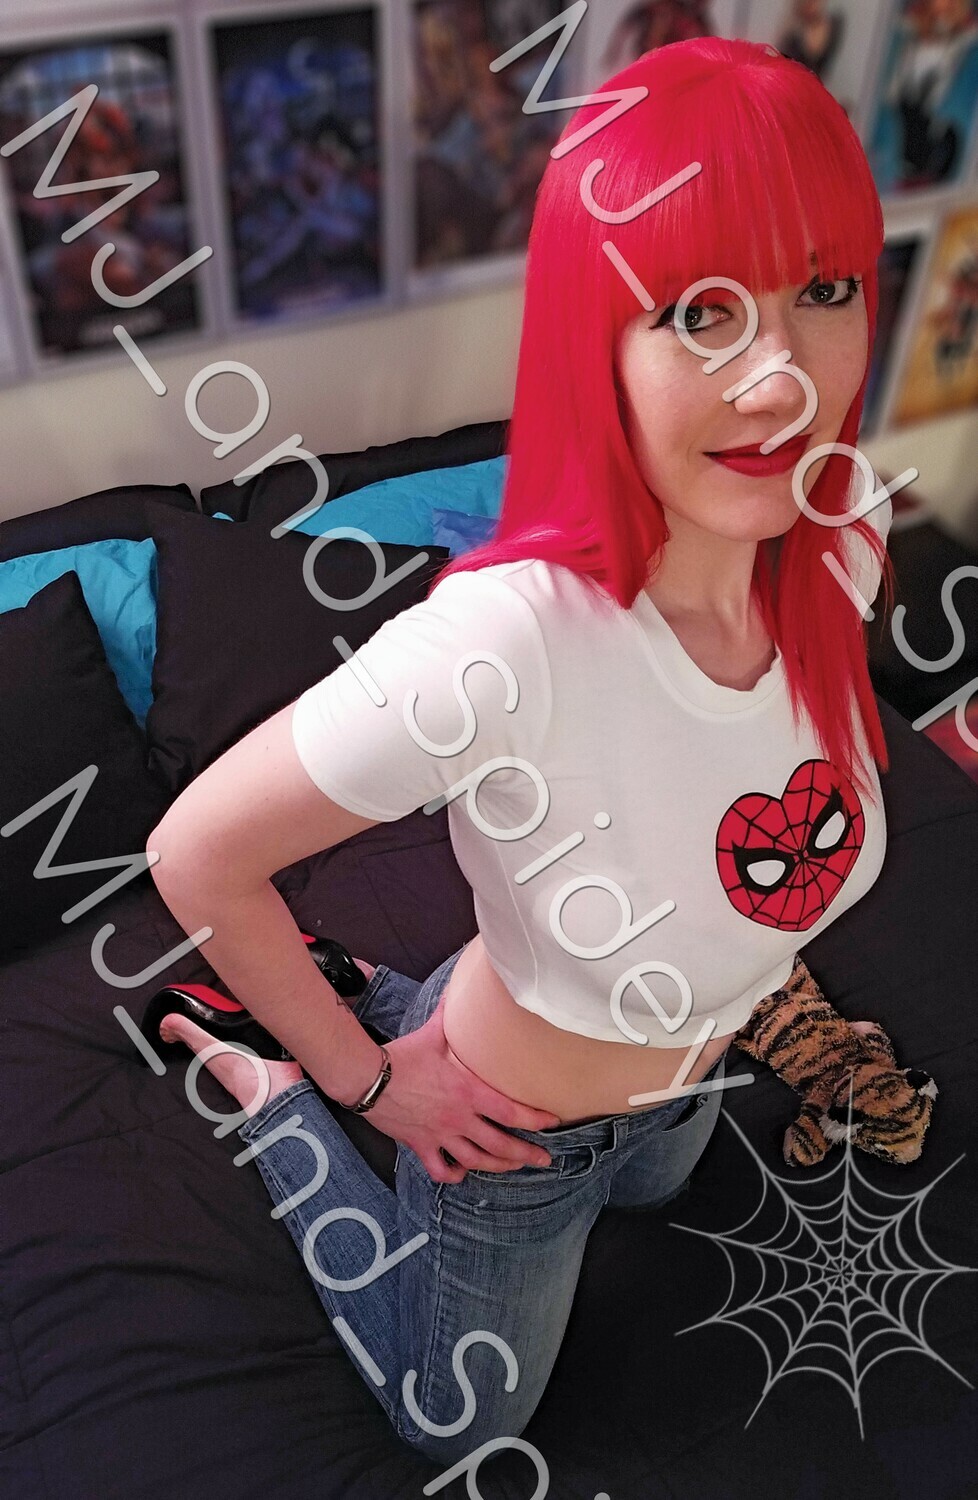 Marvel - Spider-Man - Mary Jane Watson - Classic No. 14 - 11x17 Cosplay Print (@MJ_and_Spidey, MJ and Spidey, Comics)